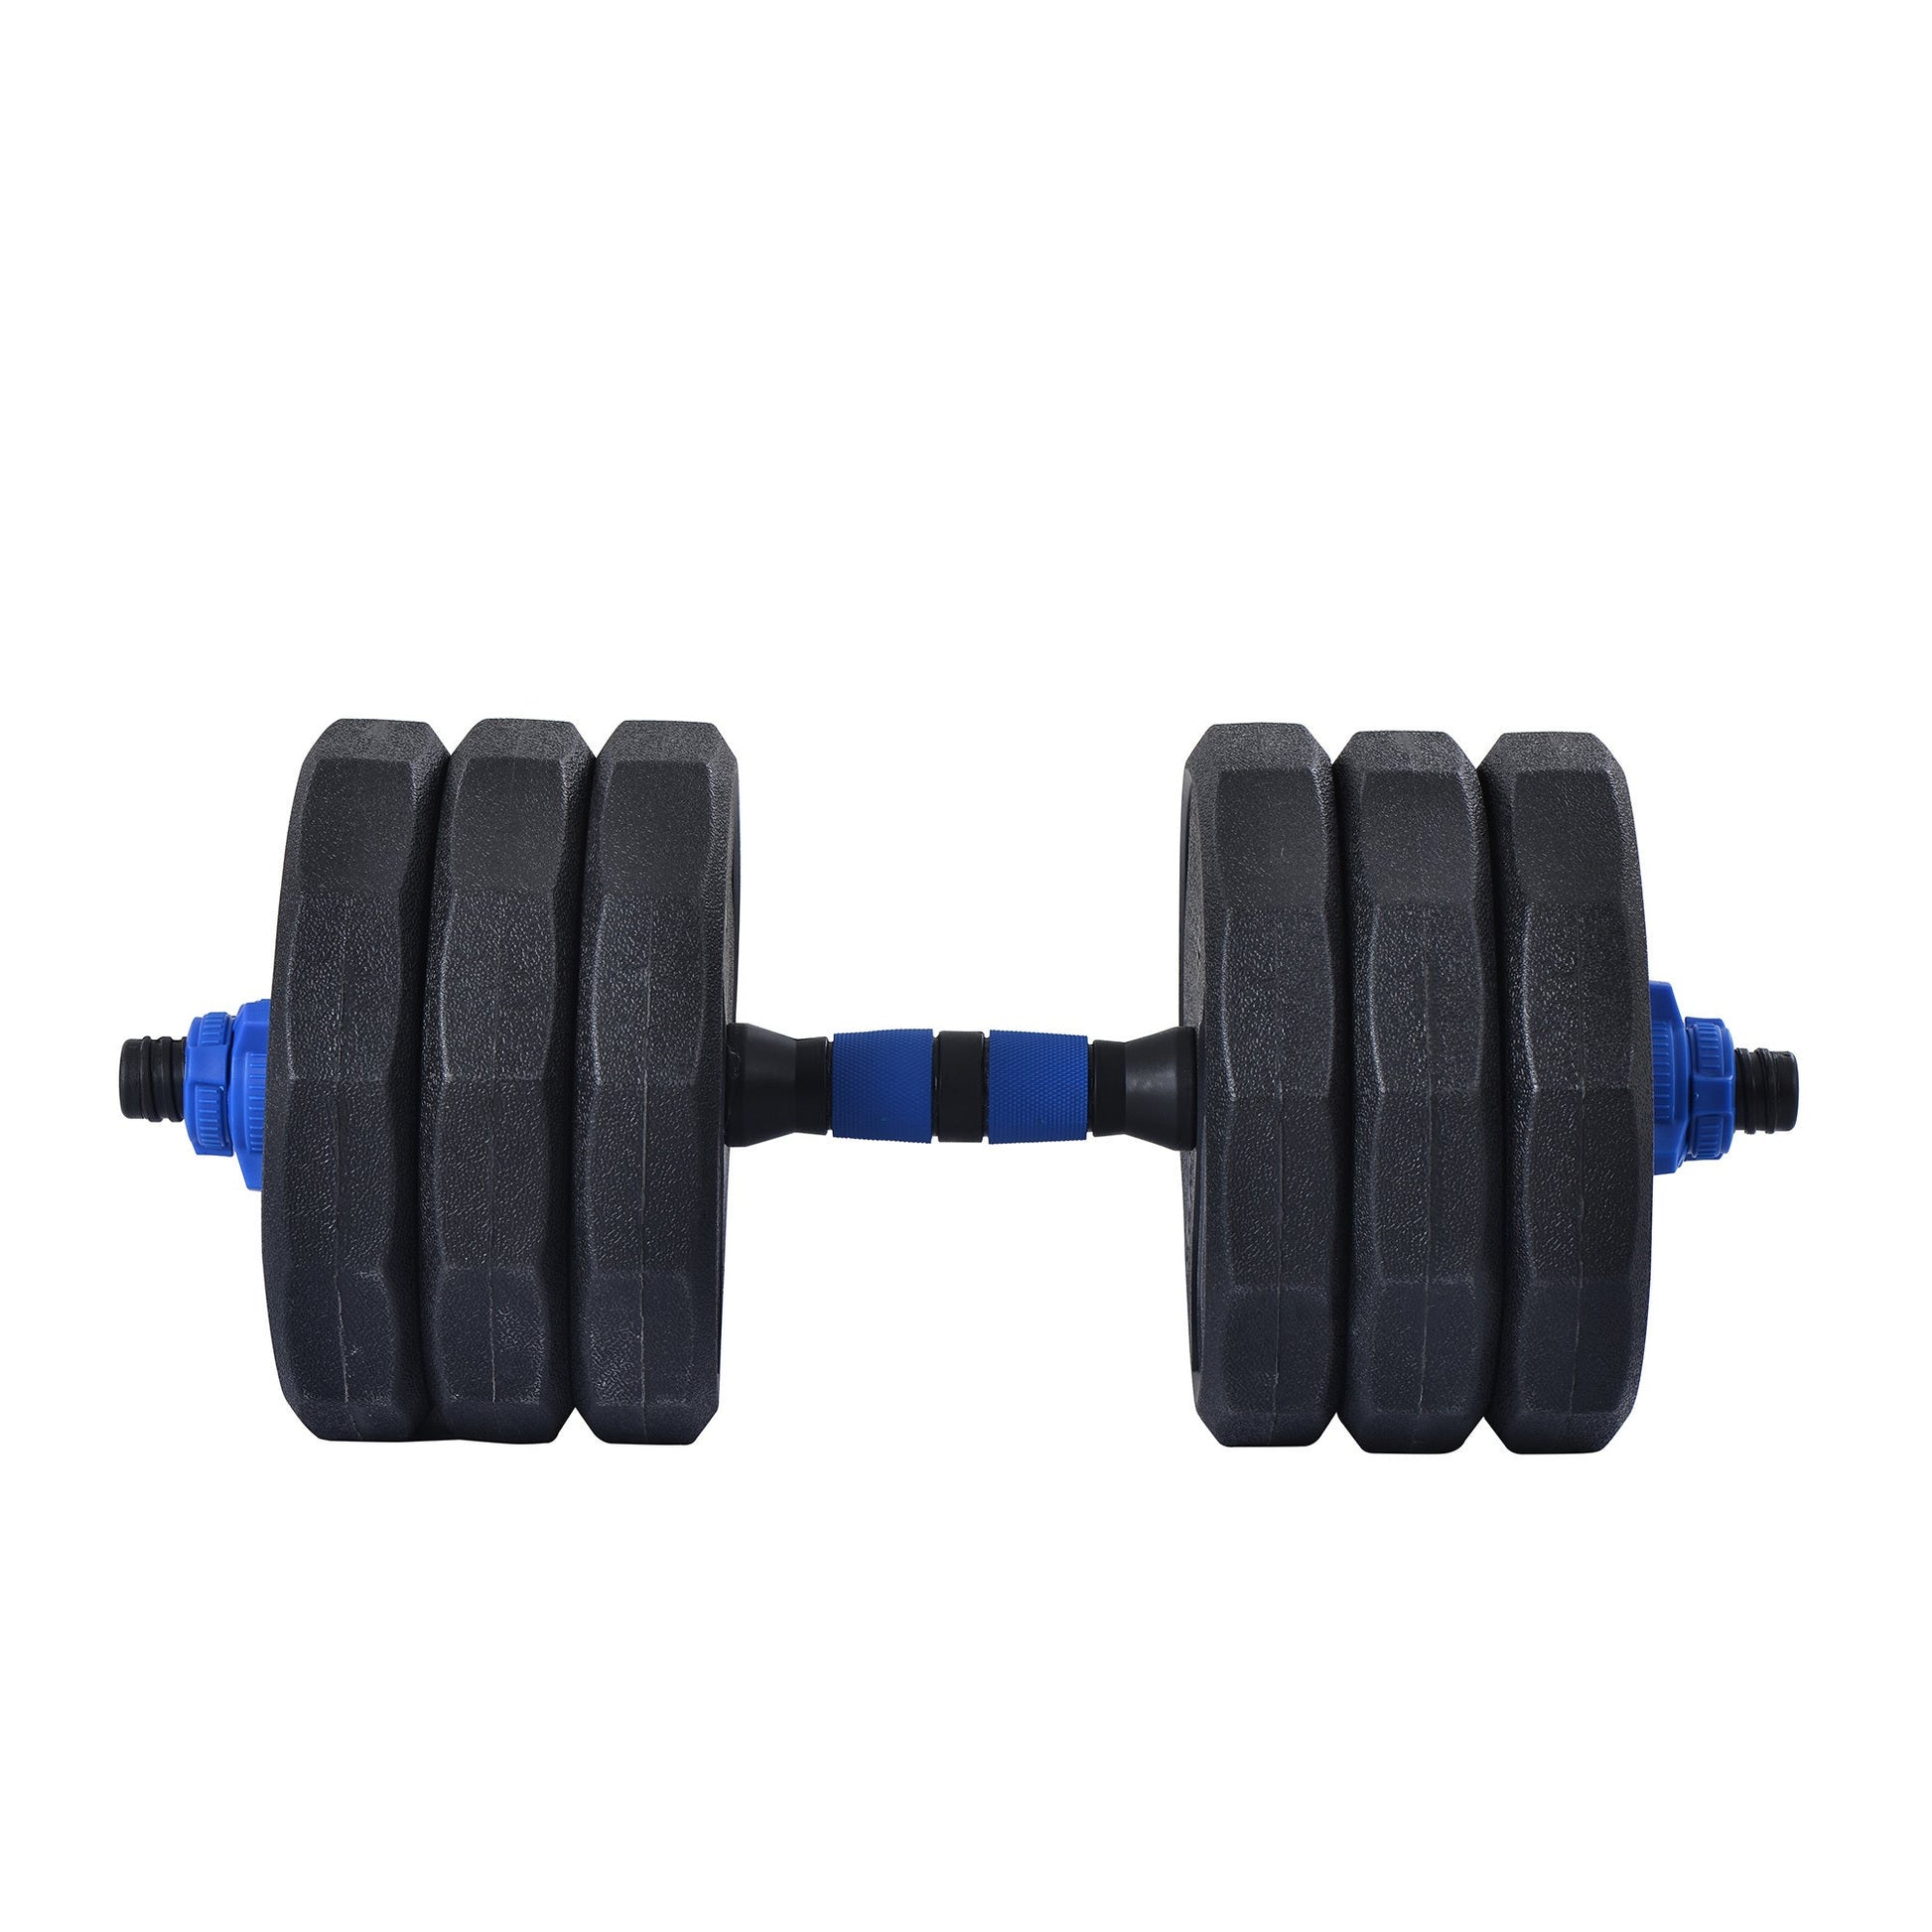 (Total 58lbs, 29lbs each) Adjustable Dumbbell Barbell Weight Pair TOTAL 58 LBS, Dumbells weights Set, Free Weights Dumbbells 2 in 1 sets with connector, Adjustable Weights Dumbbells Set for Home Gym THEGSND LLC